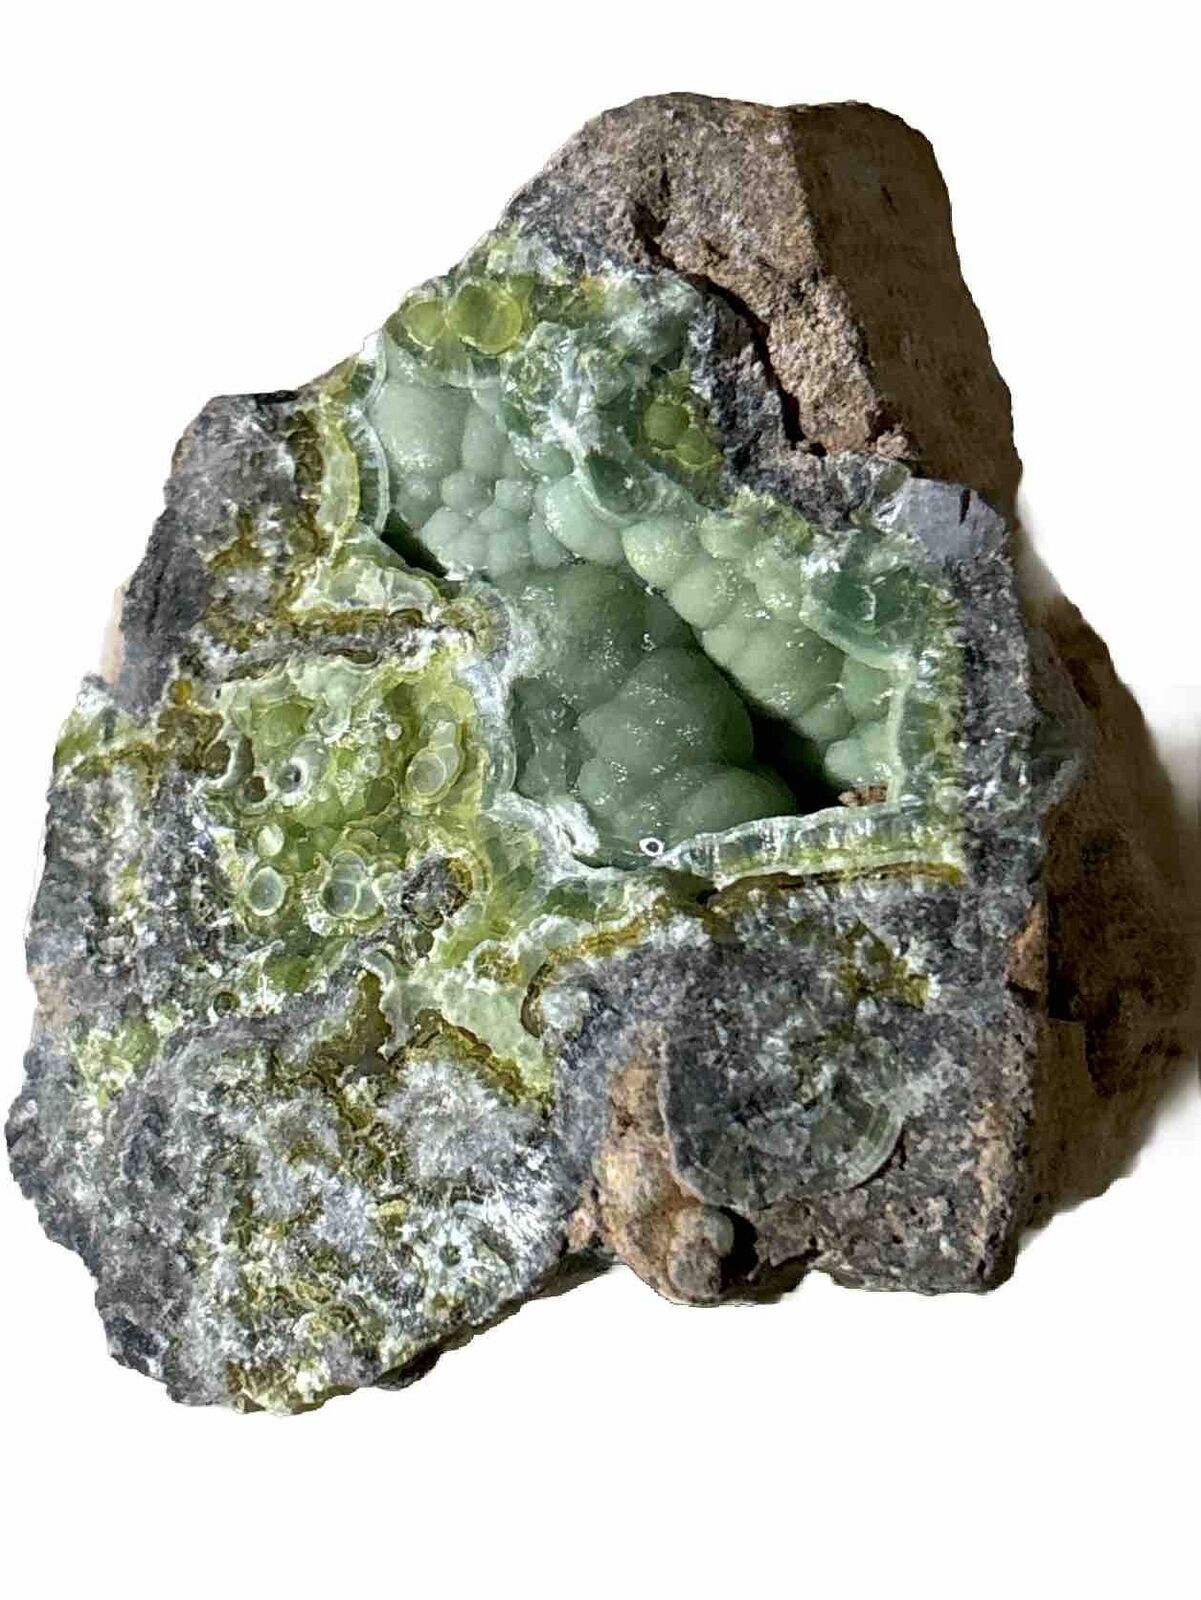 Botryoidal Green Wavellite Crystals on Matrix from Arkansas 2.5in.x2in.